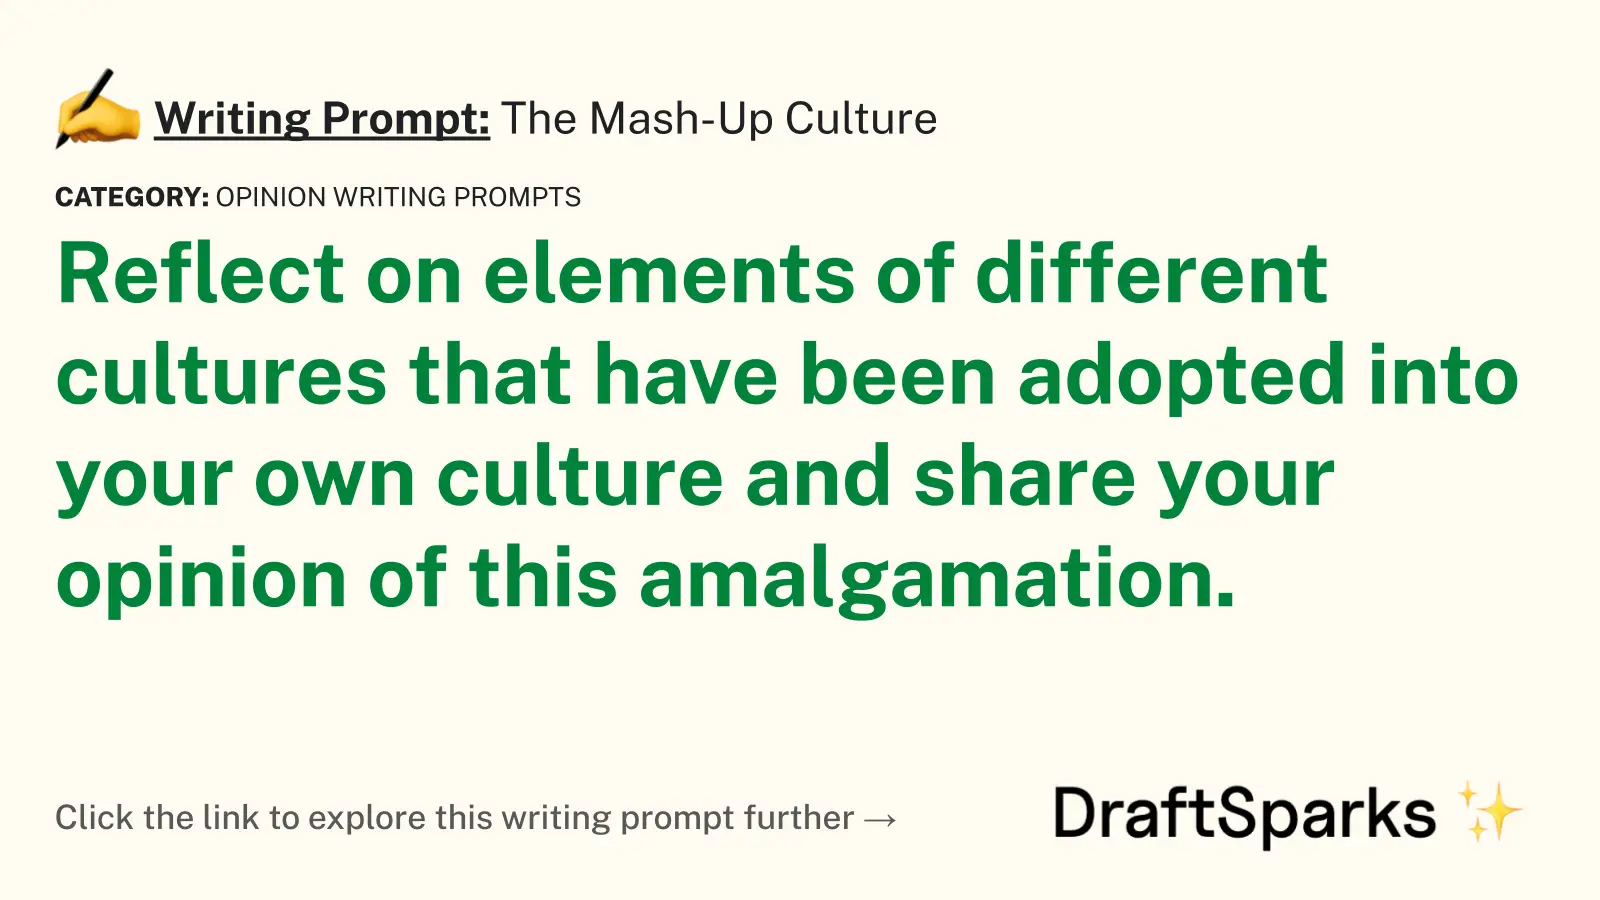 The Mash-Up Culture